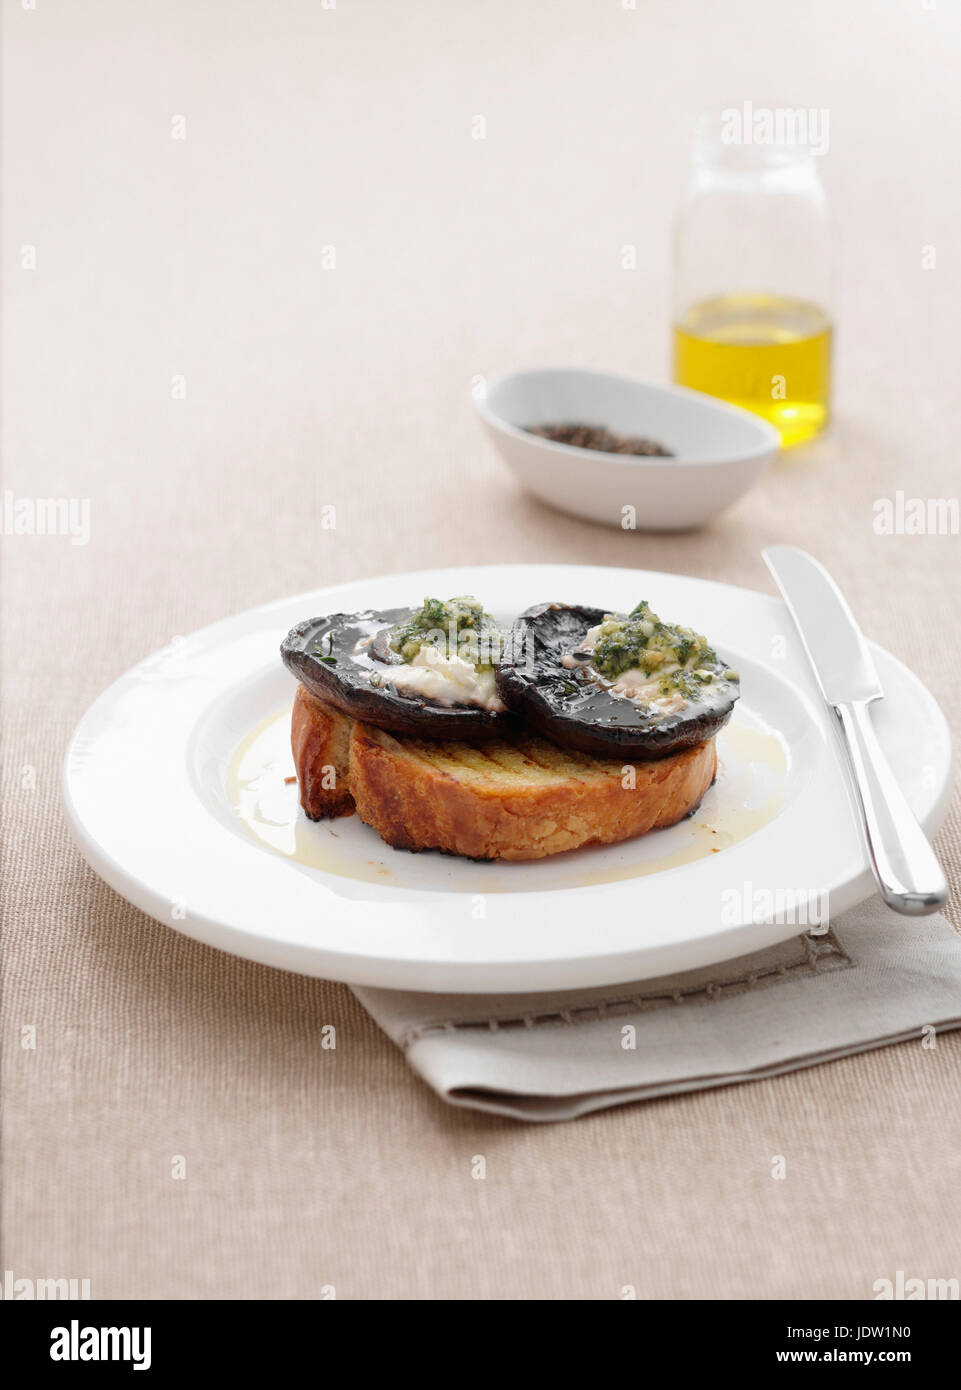 Plate of bread with mushrooms Stock Photo